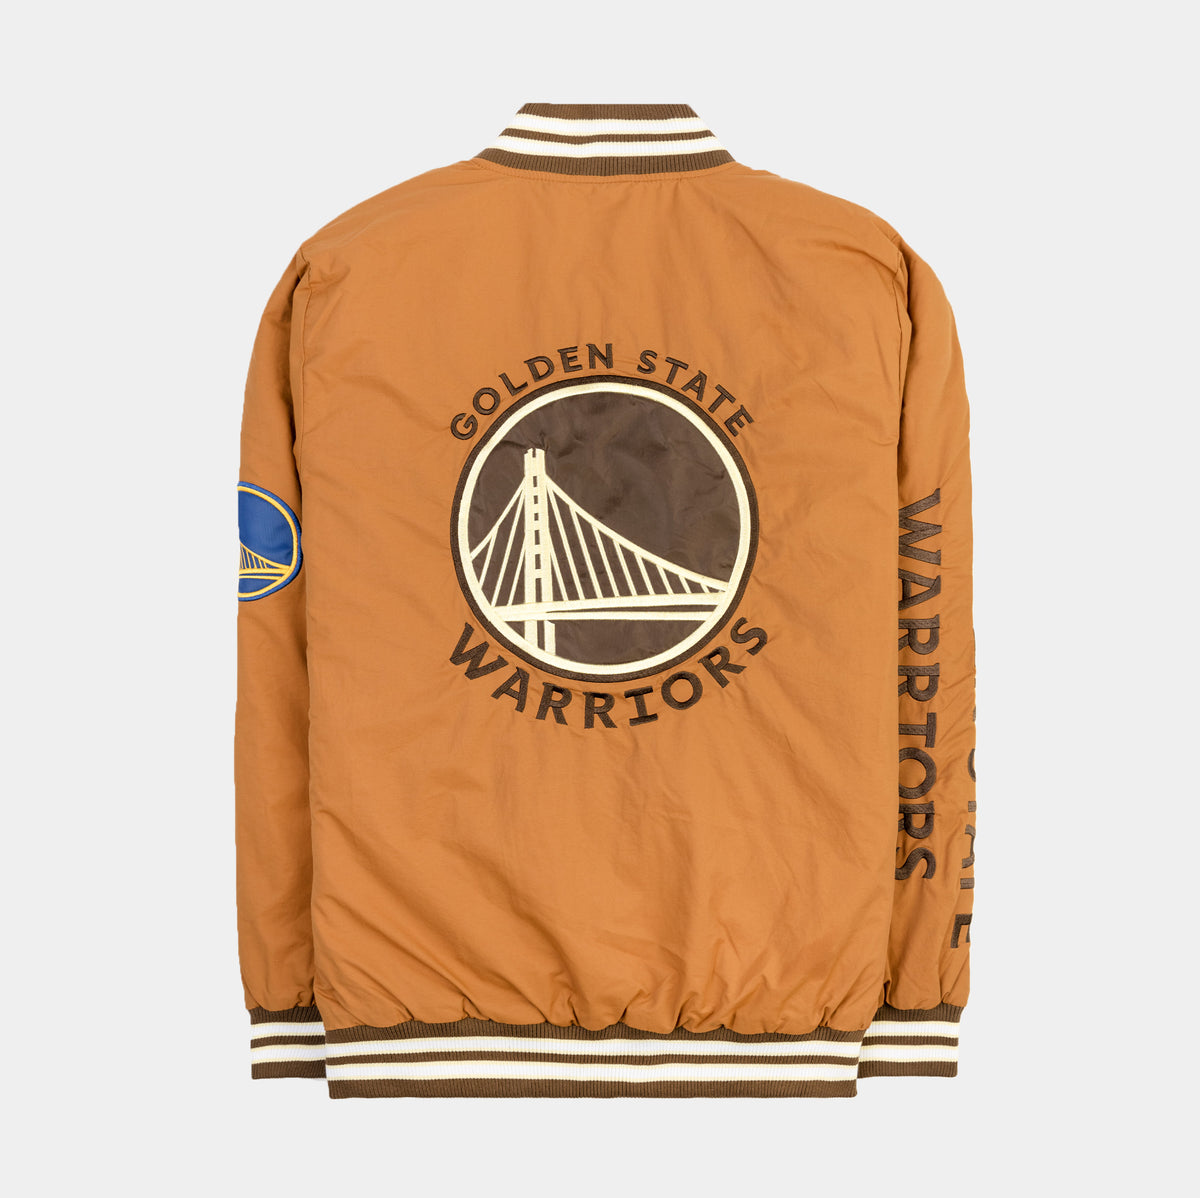 Shoe Palace Exclusive Golden State Warriors Mens Jacket (Brown)